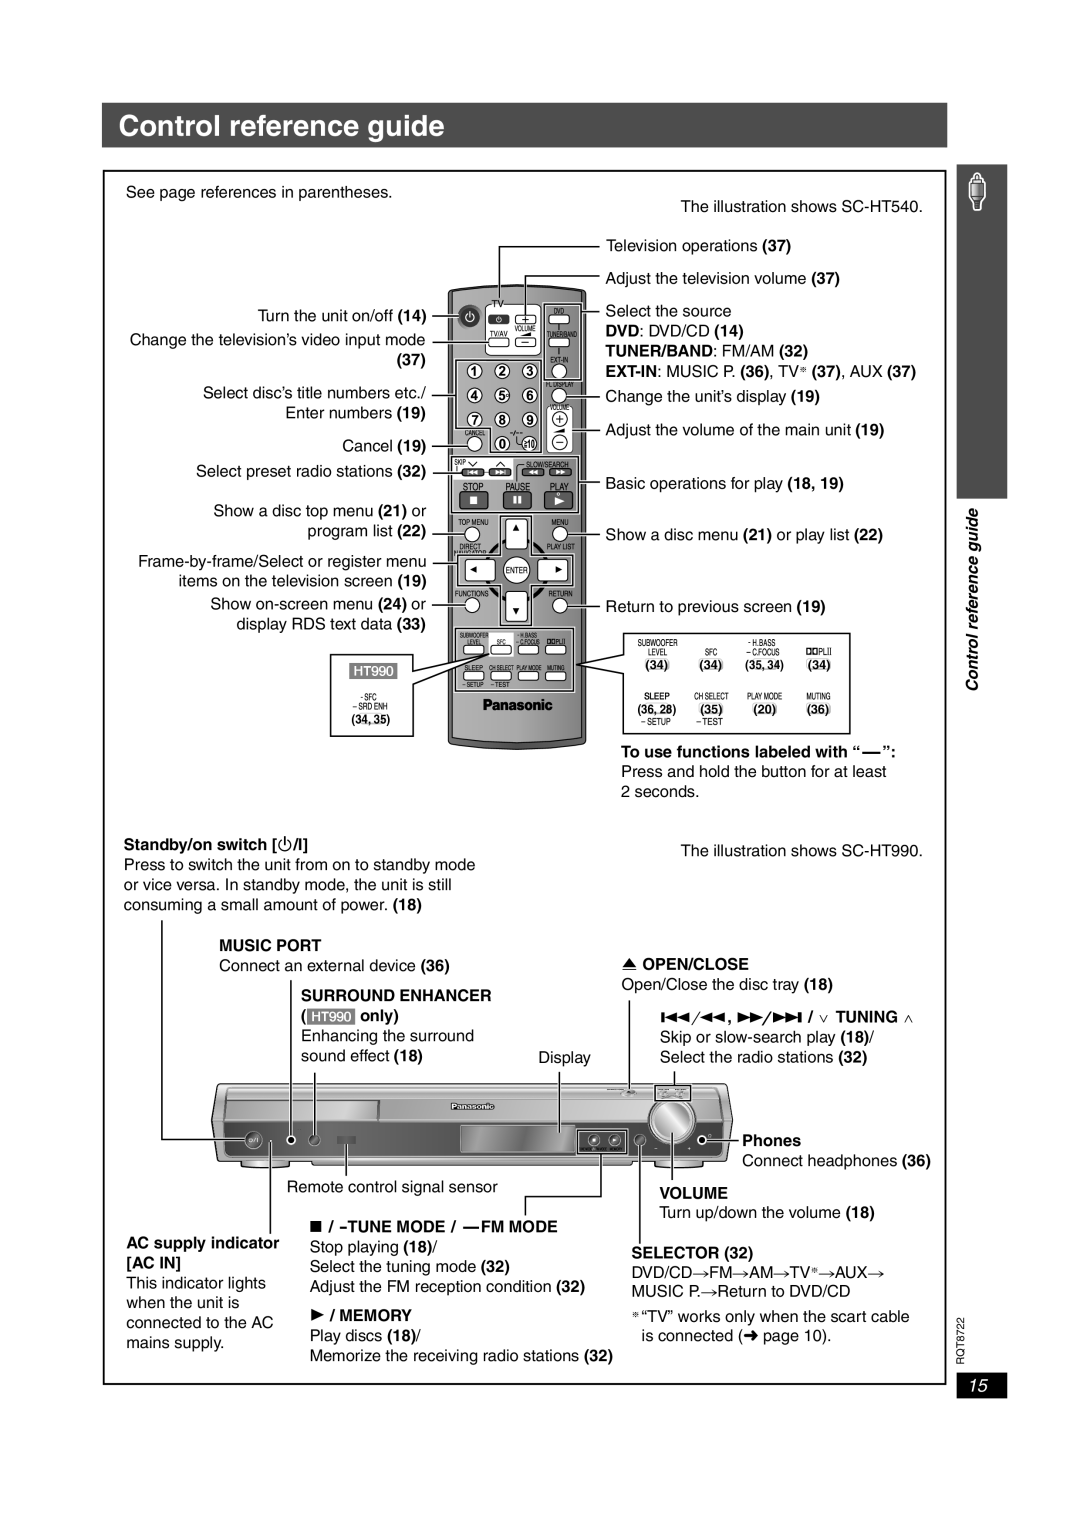 Panasonic SC-HT990 Control reference guide, Tuner/Band: Fm/Am, To use functions labeled with “-”, Standby/on switch Í/I 